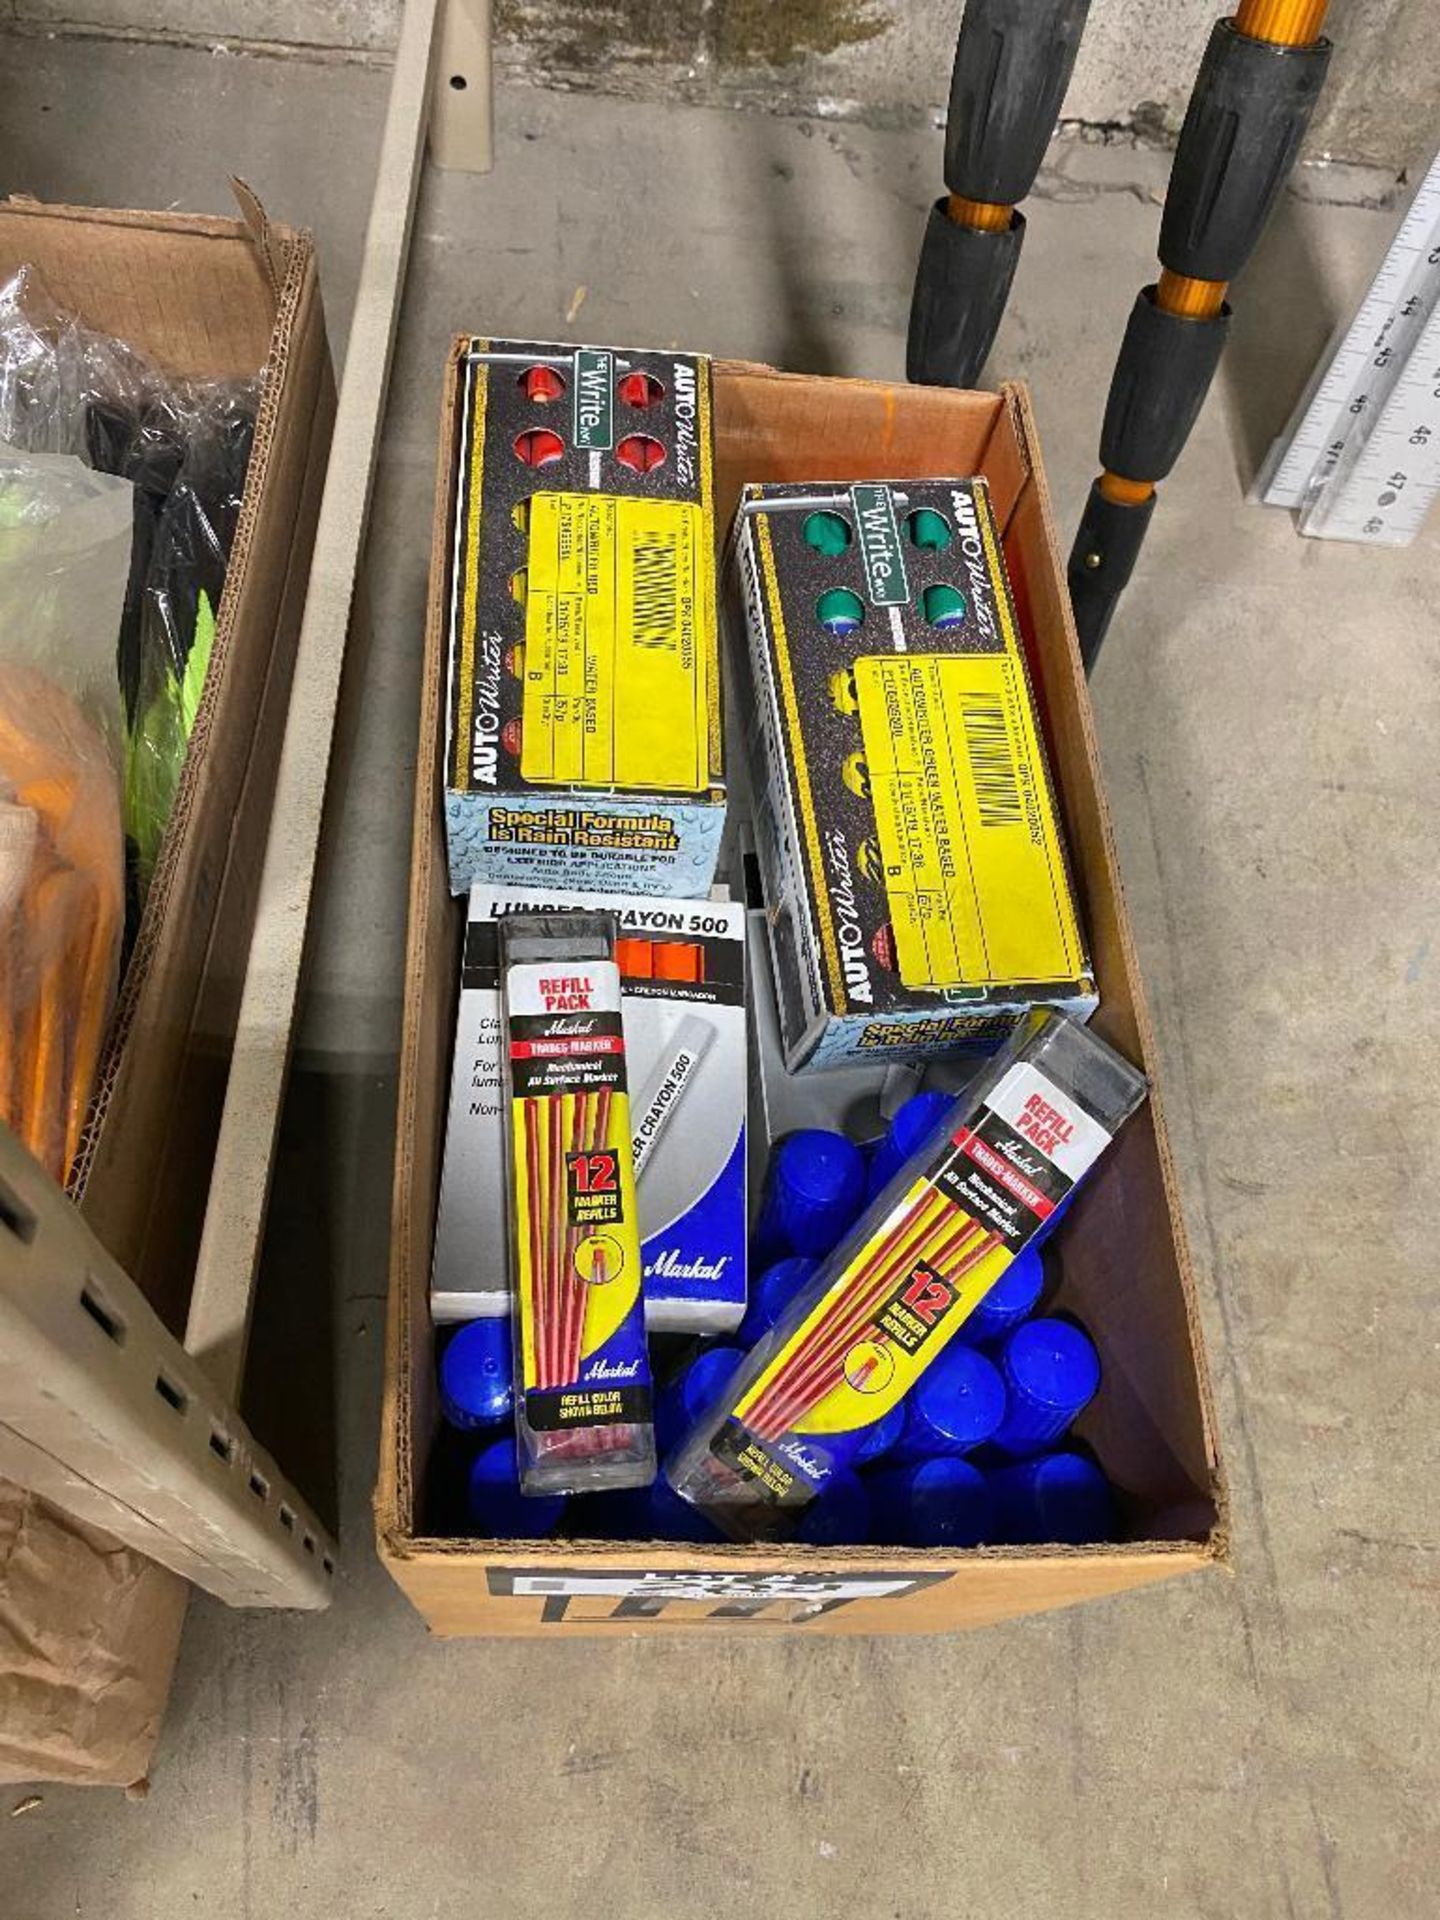 Lot of Asst. Promax Paint Markers, Paint Pens, Lumber Crayons, etc. - Image 2 of 2